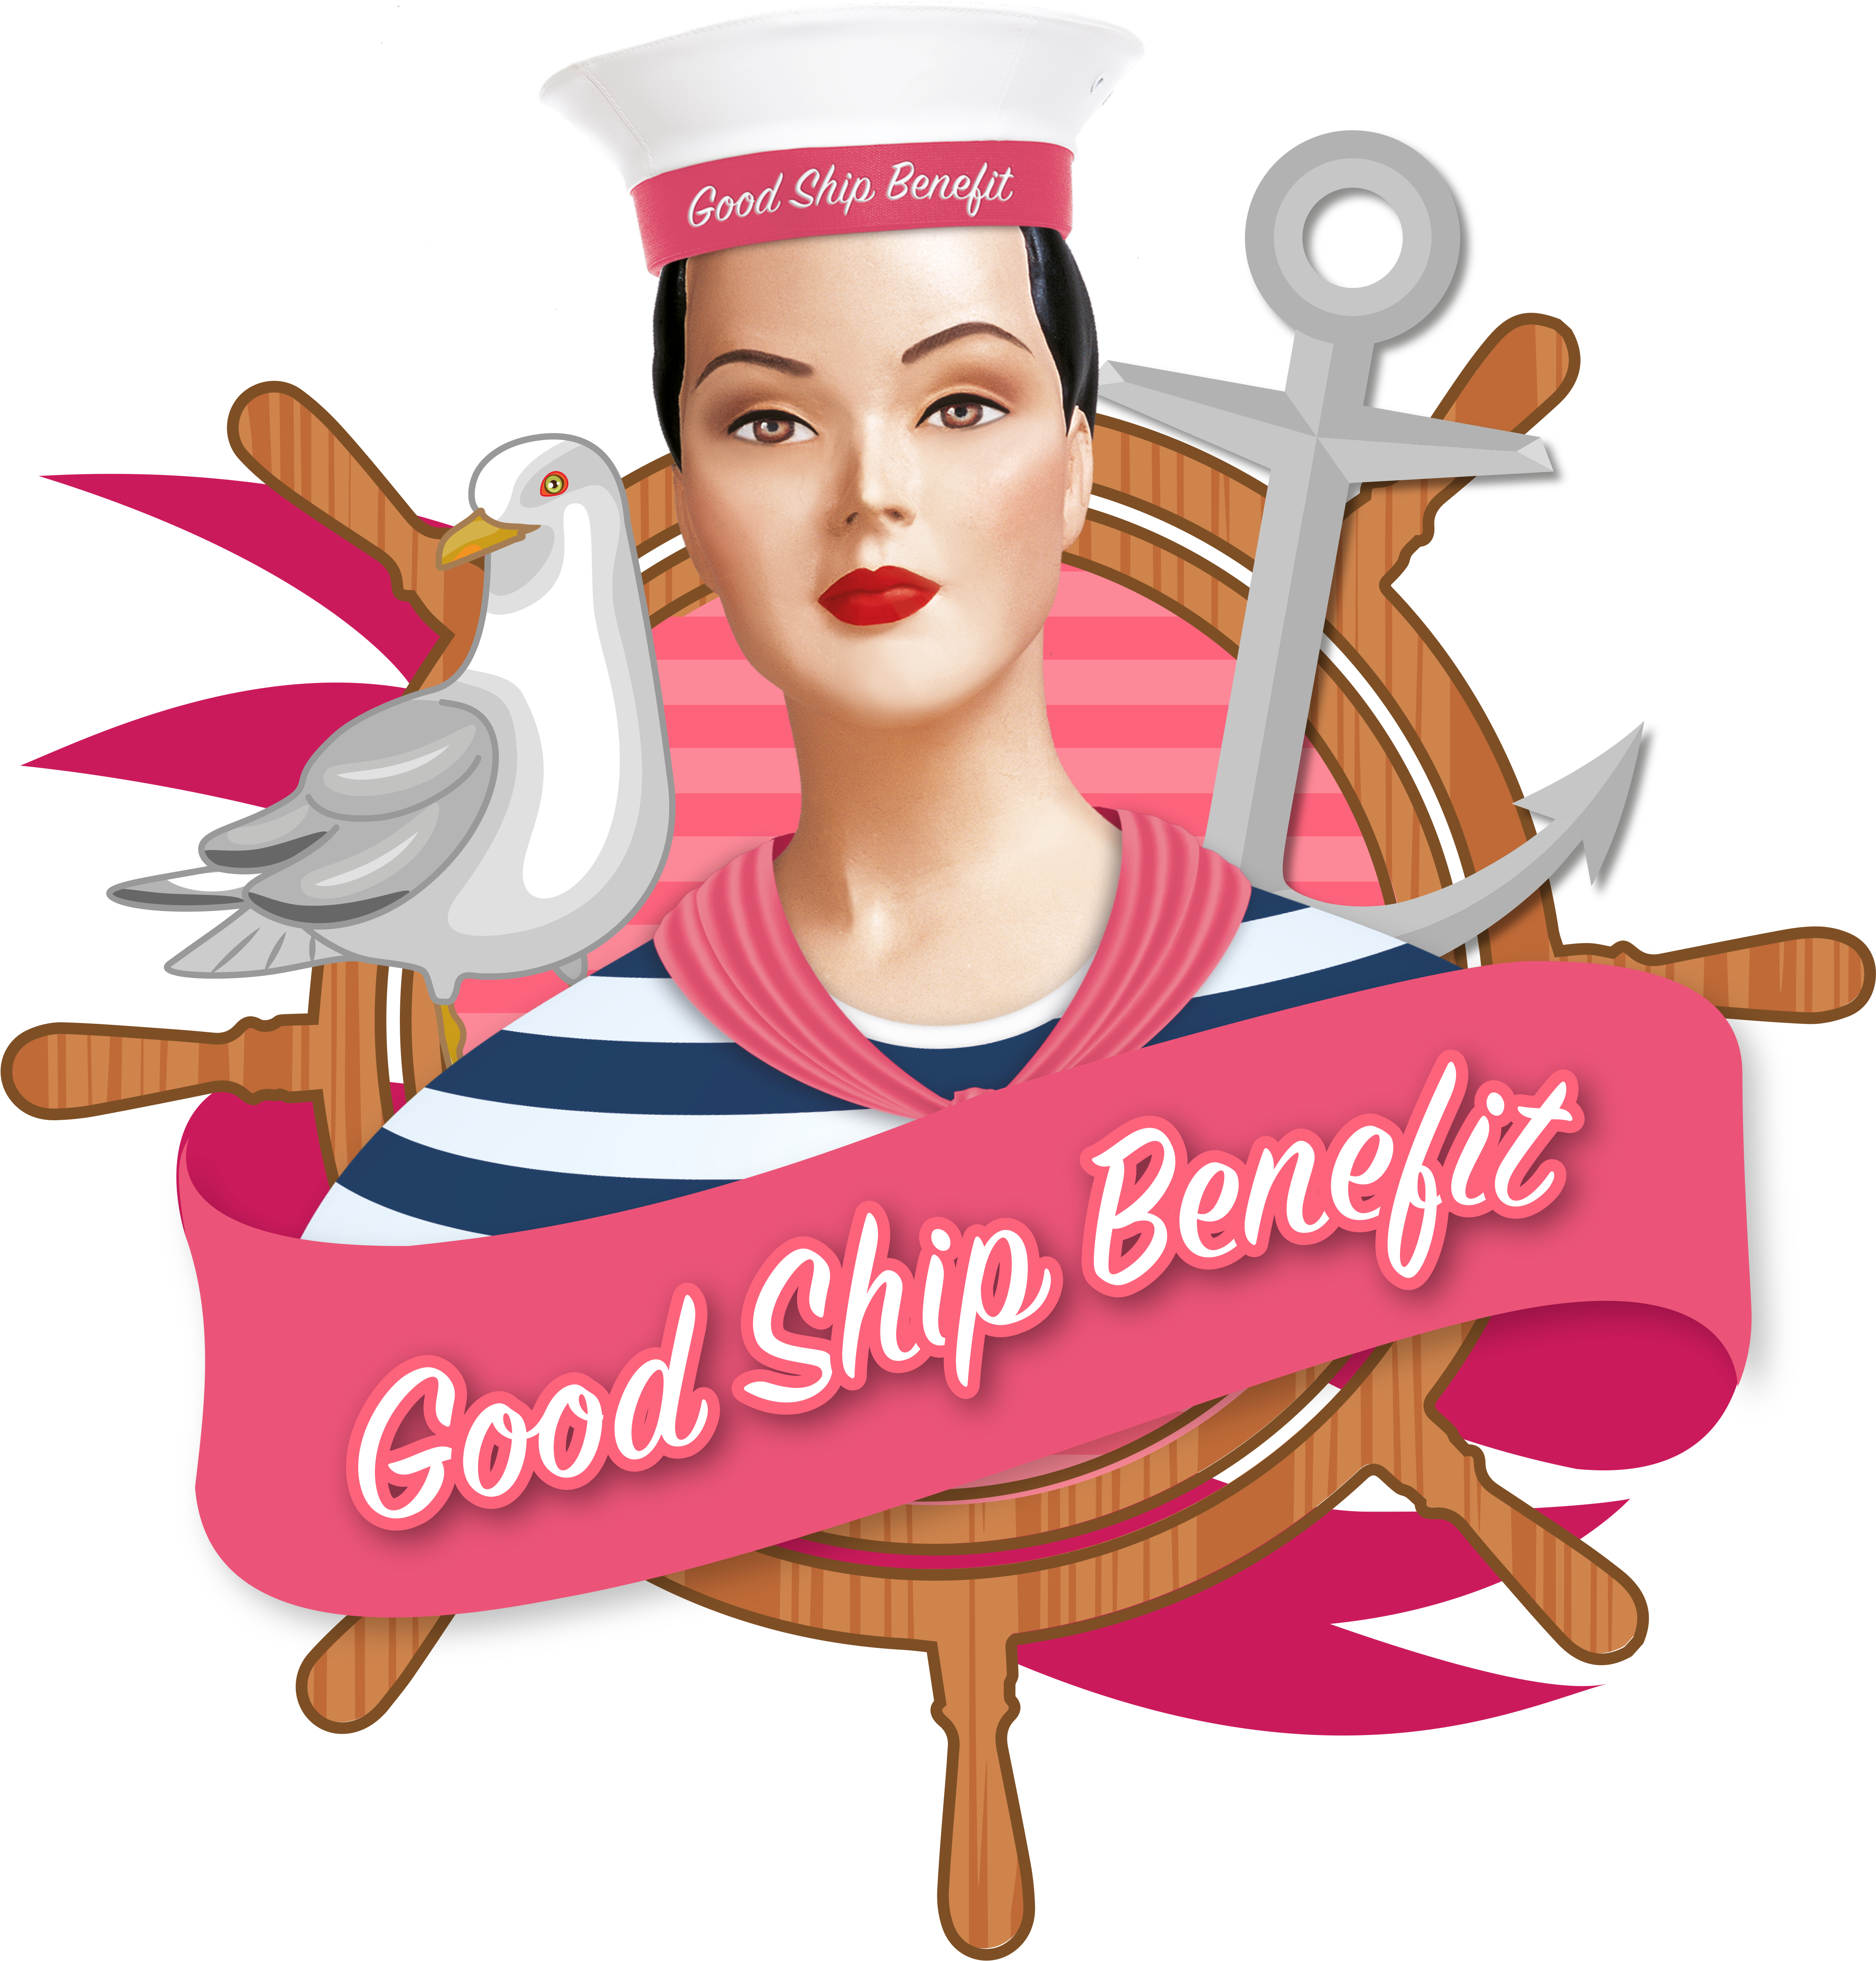 Download and share clipart about The Good Ship Benefit - Good Ship Benefit ...